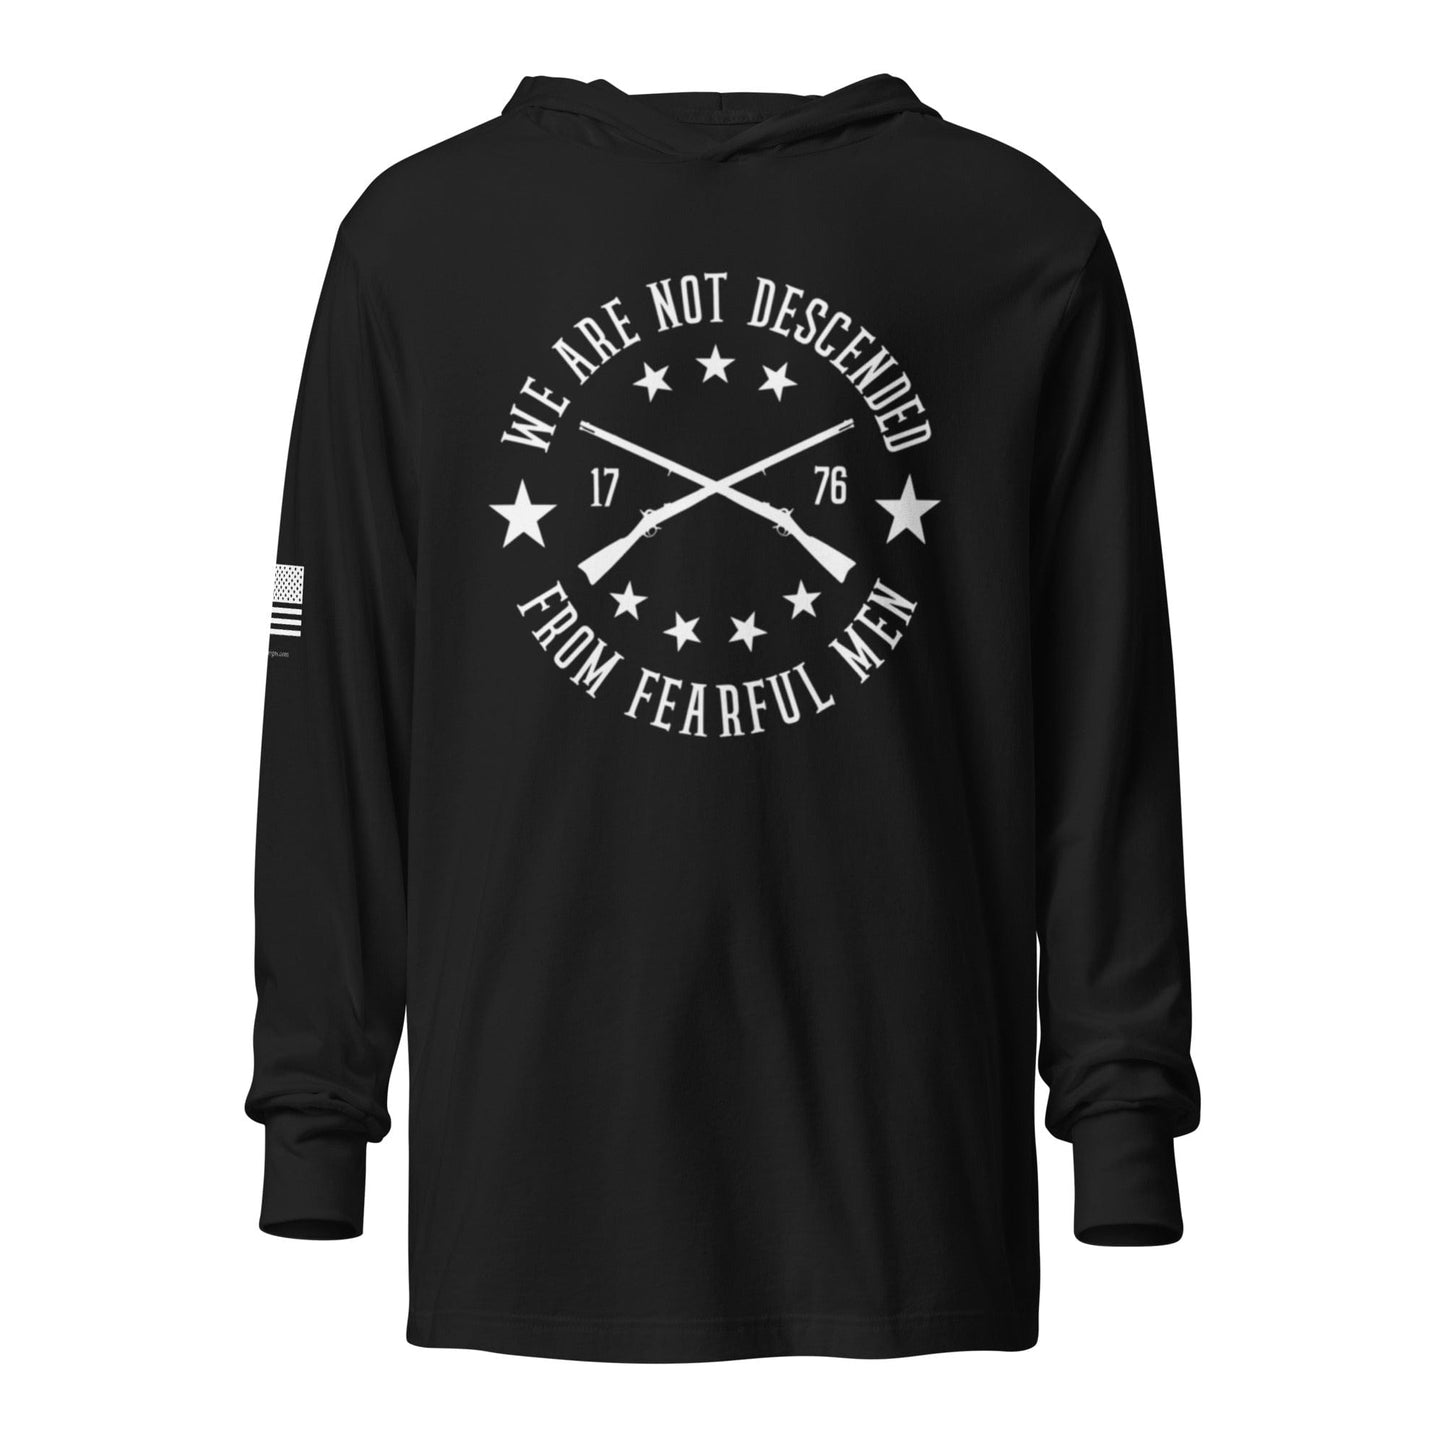 FreedomKat Designs, LLC Black / XS We Are Not Descended Hooded long-sleeve tee